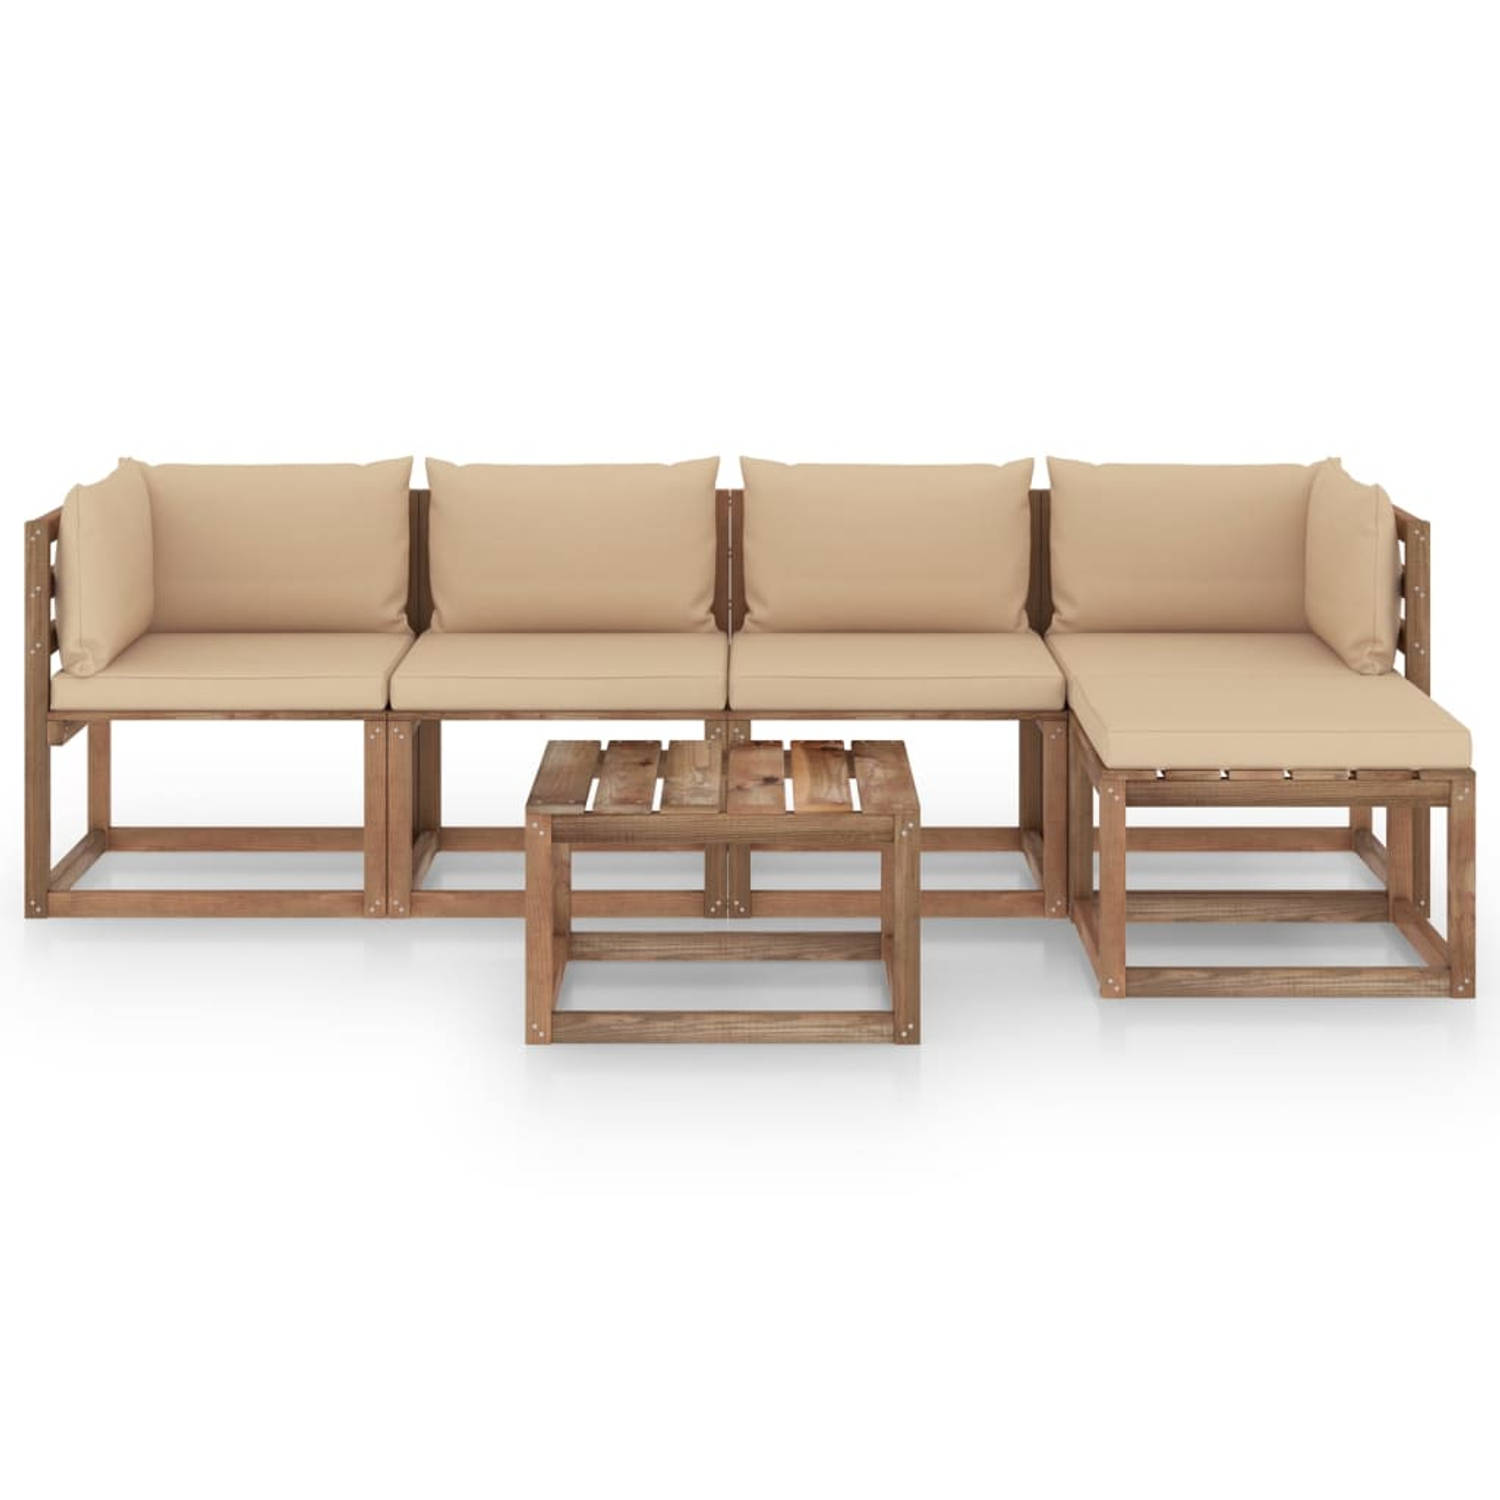 The Living Store Loungeset Grenenhout - Tuinmeubelen - 60x60x70cm - Beige